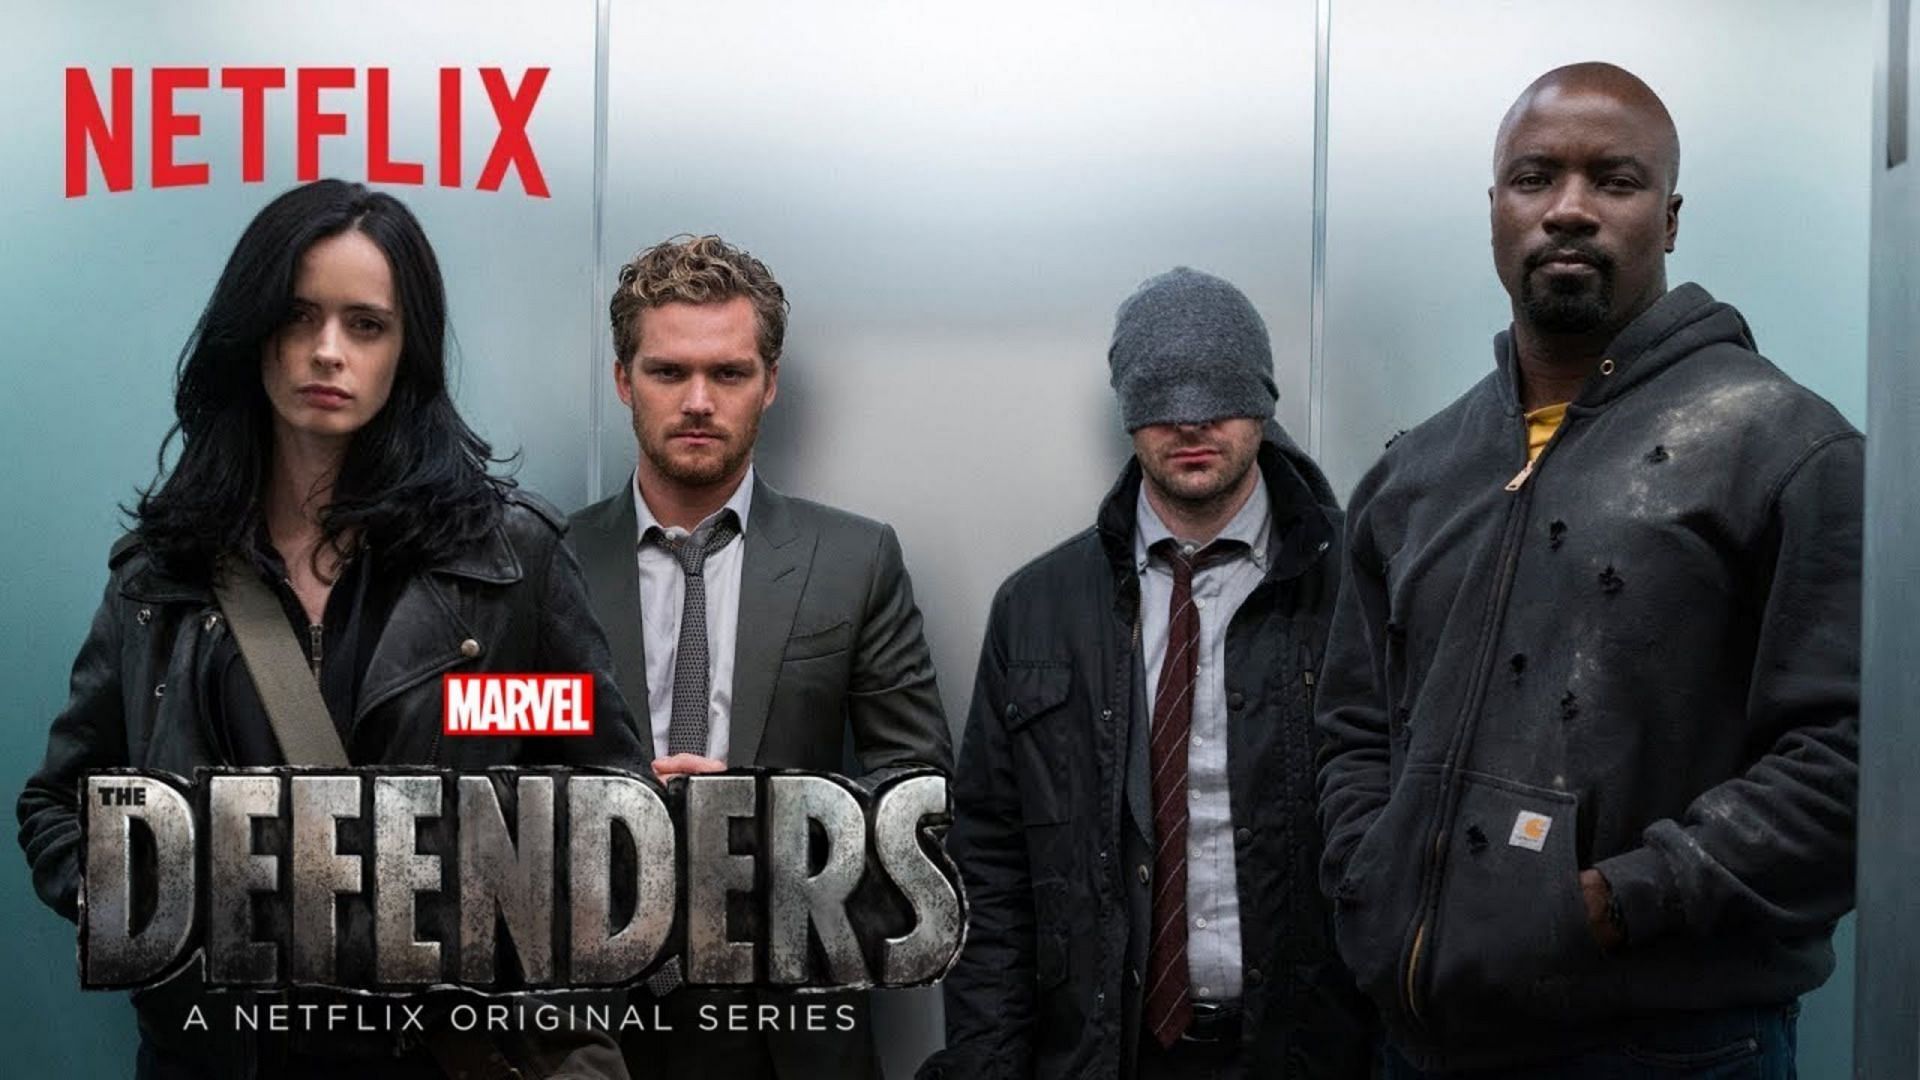 Netflix to remove The Defenders and related shows from its platform (Image via Twitter/Netflix)